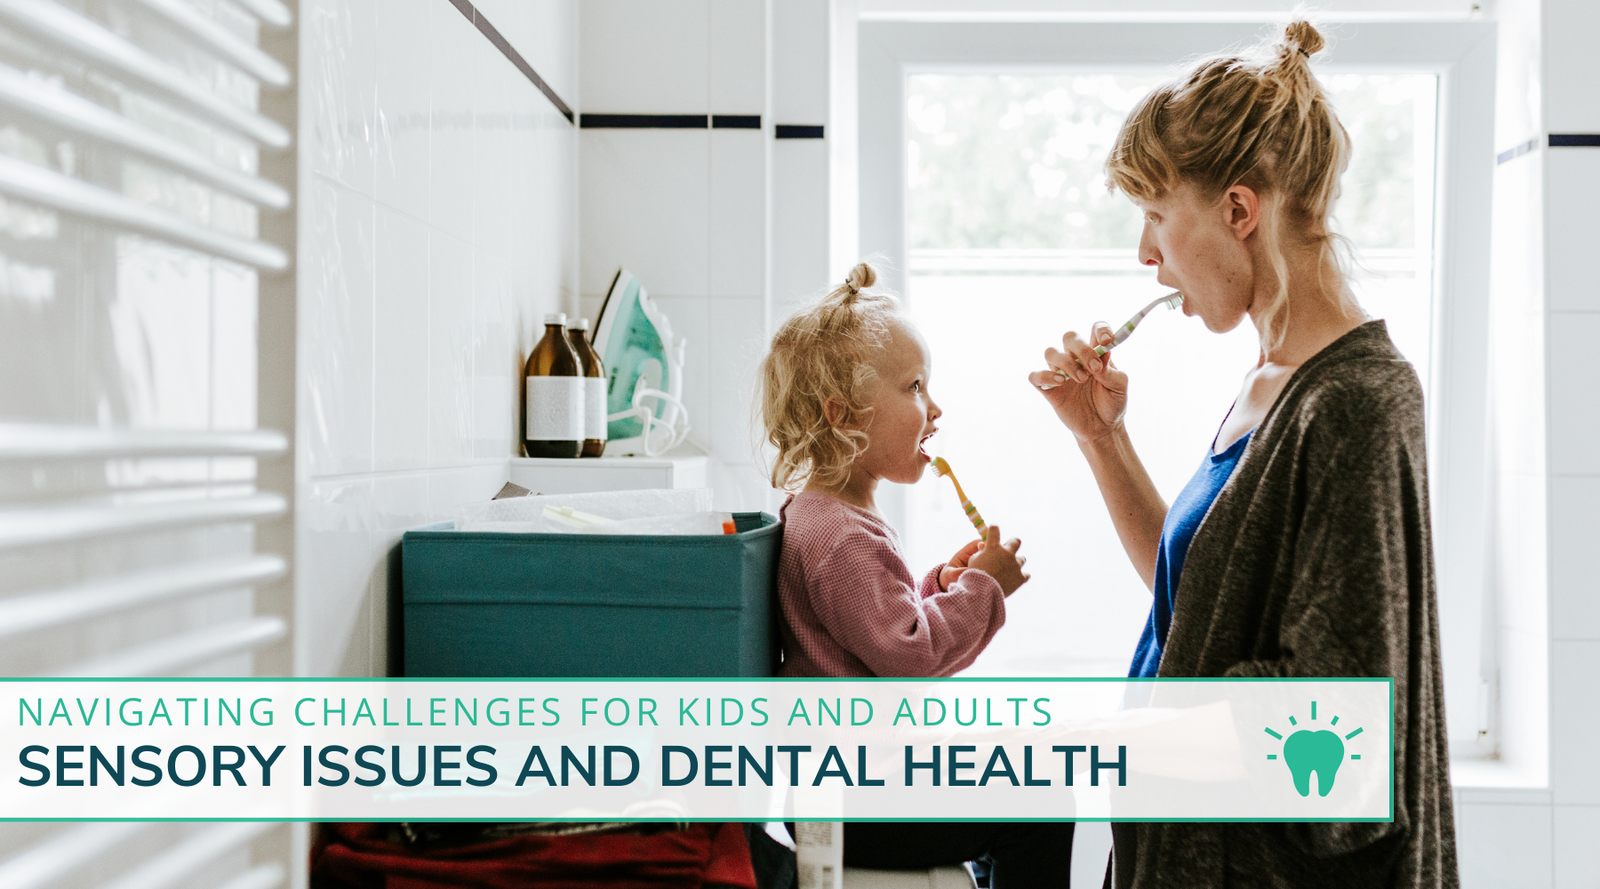 Sensory Issues and Dental Health: Navigating Challenges for Kids and Adults